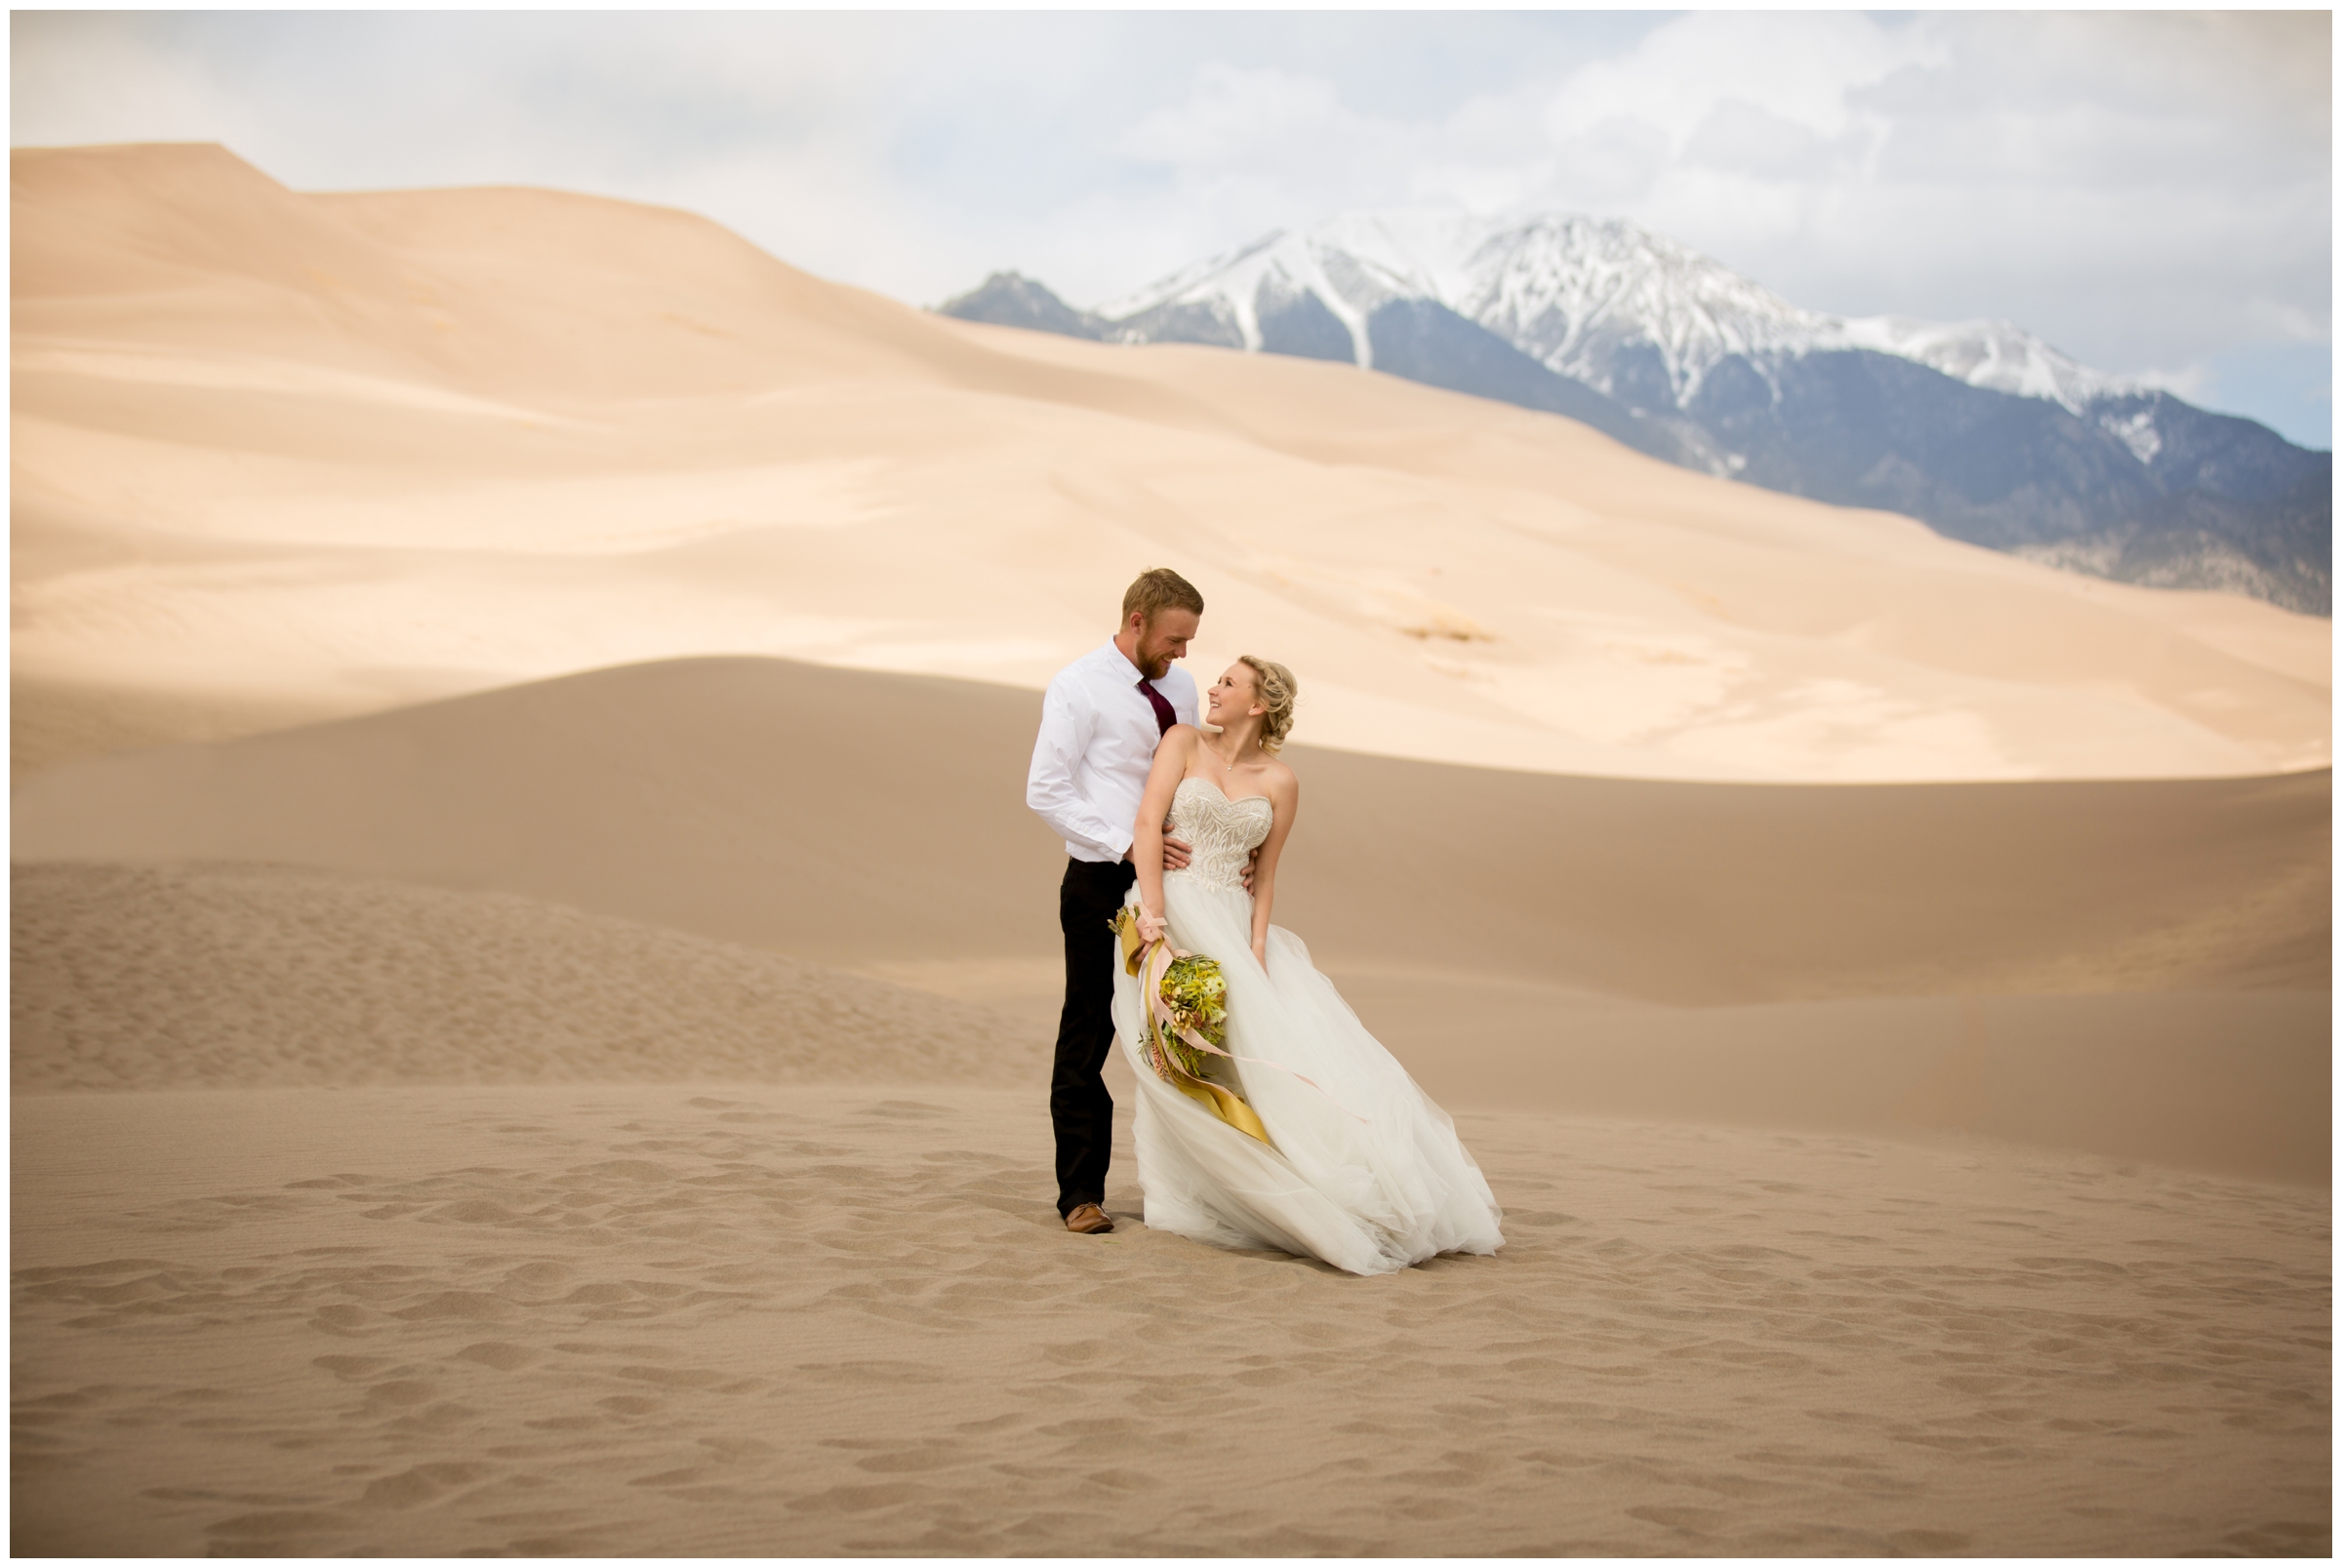 Colorado adventure elopement inspiration with sand dunes and mountains in background 